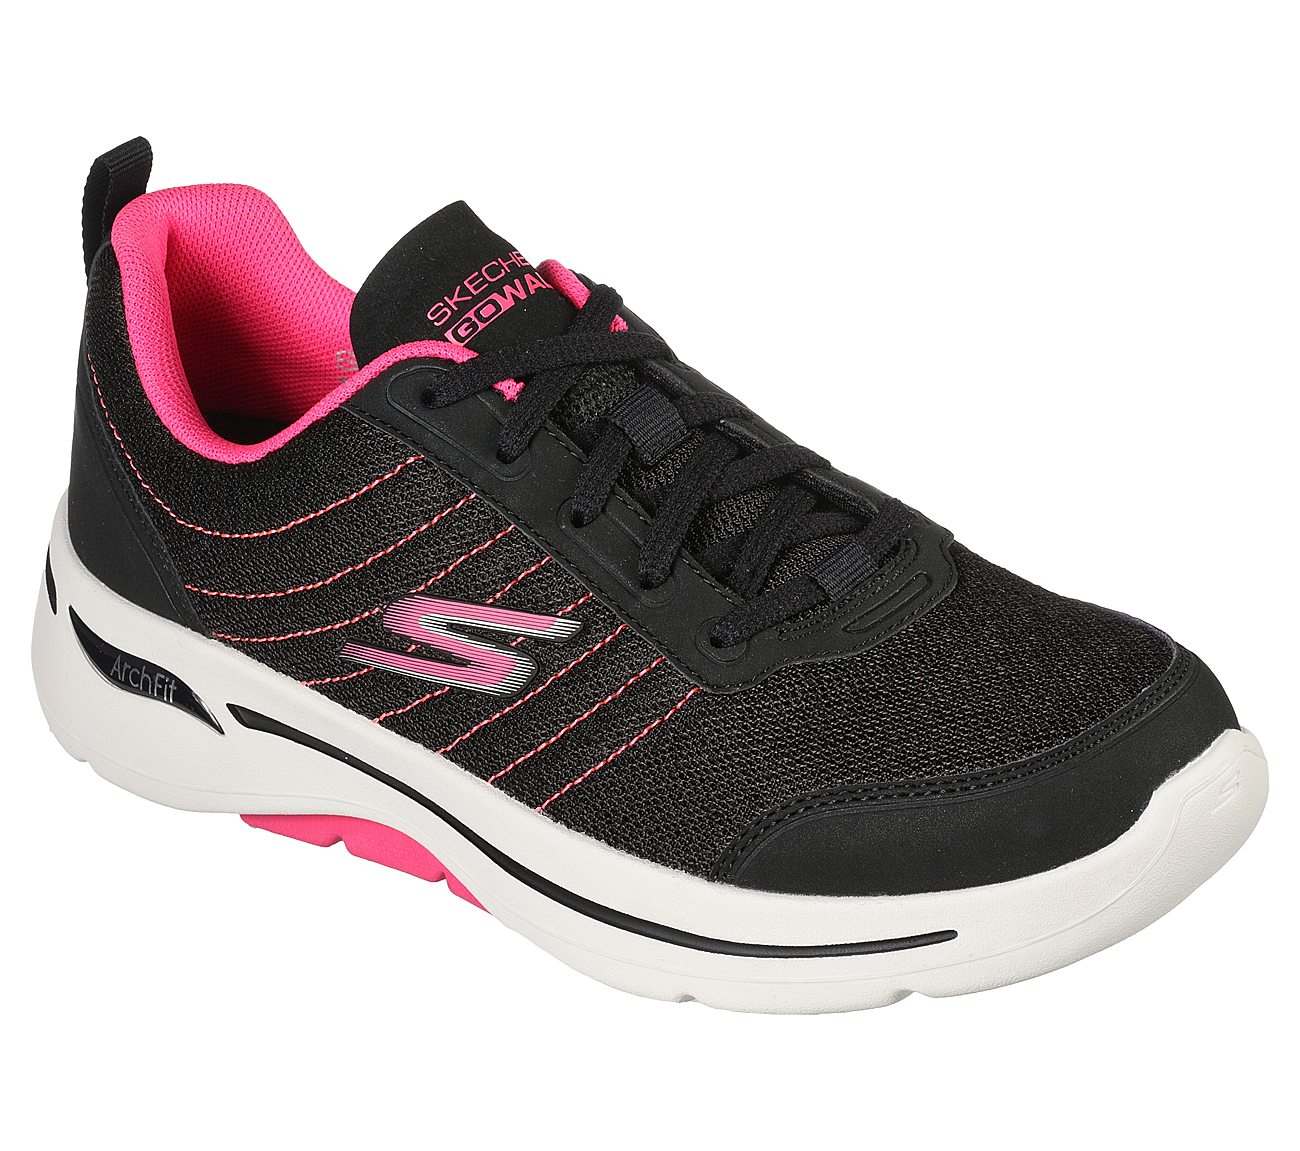 GO WALK ARCH FIT-TRUE VISION, BLACK/PINK Footwear Right View